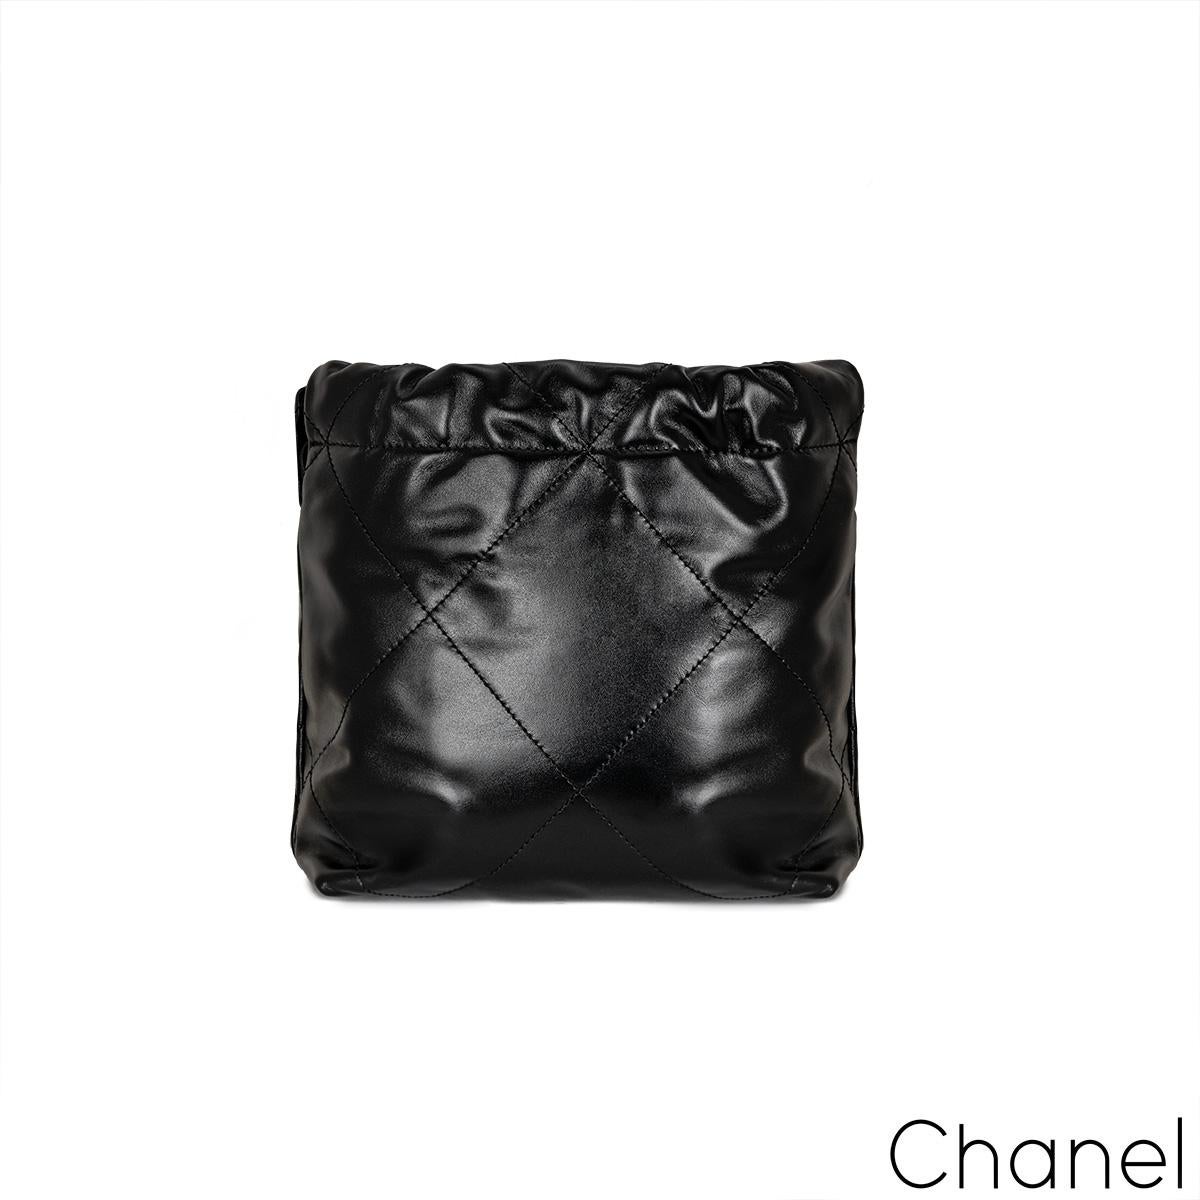 A lovely Chanel 22 Mini Bag. The exterior is crafted in quilted black shiny calfskin leather with gold-tone hardware. It features a gold tone logo in the front, a dangling CC logo medallion and comes with a versatile interwoven chain and leather